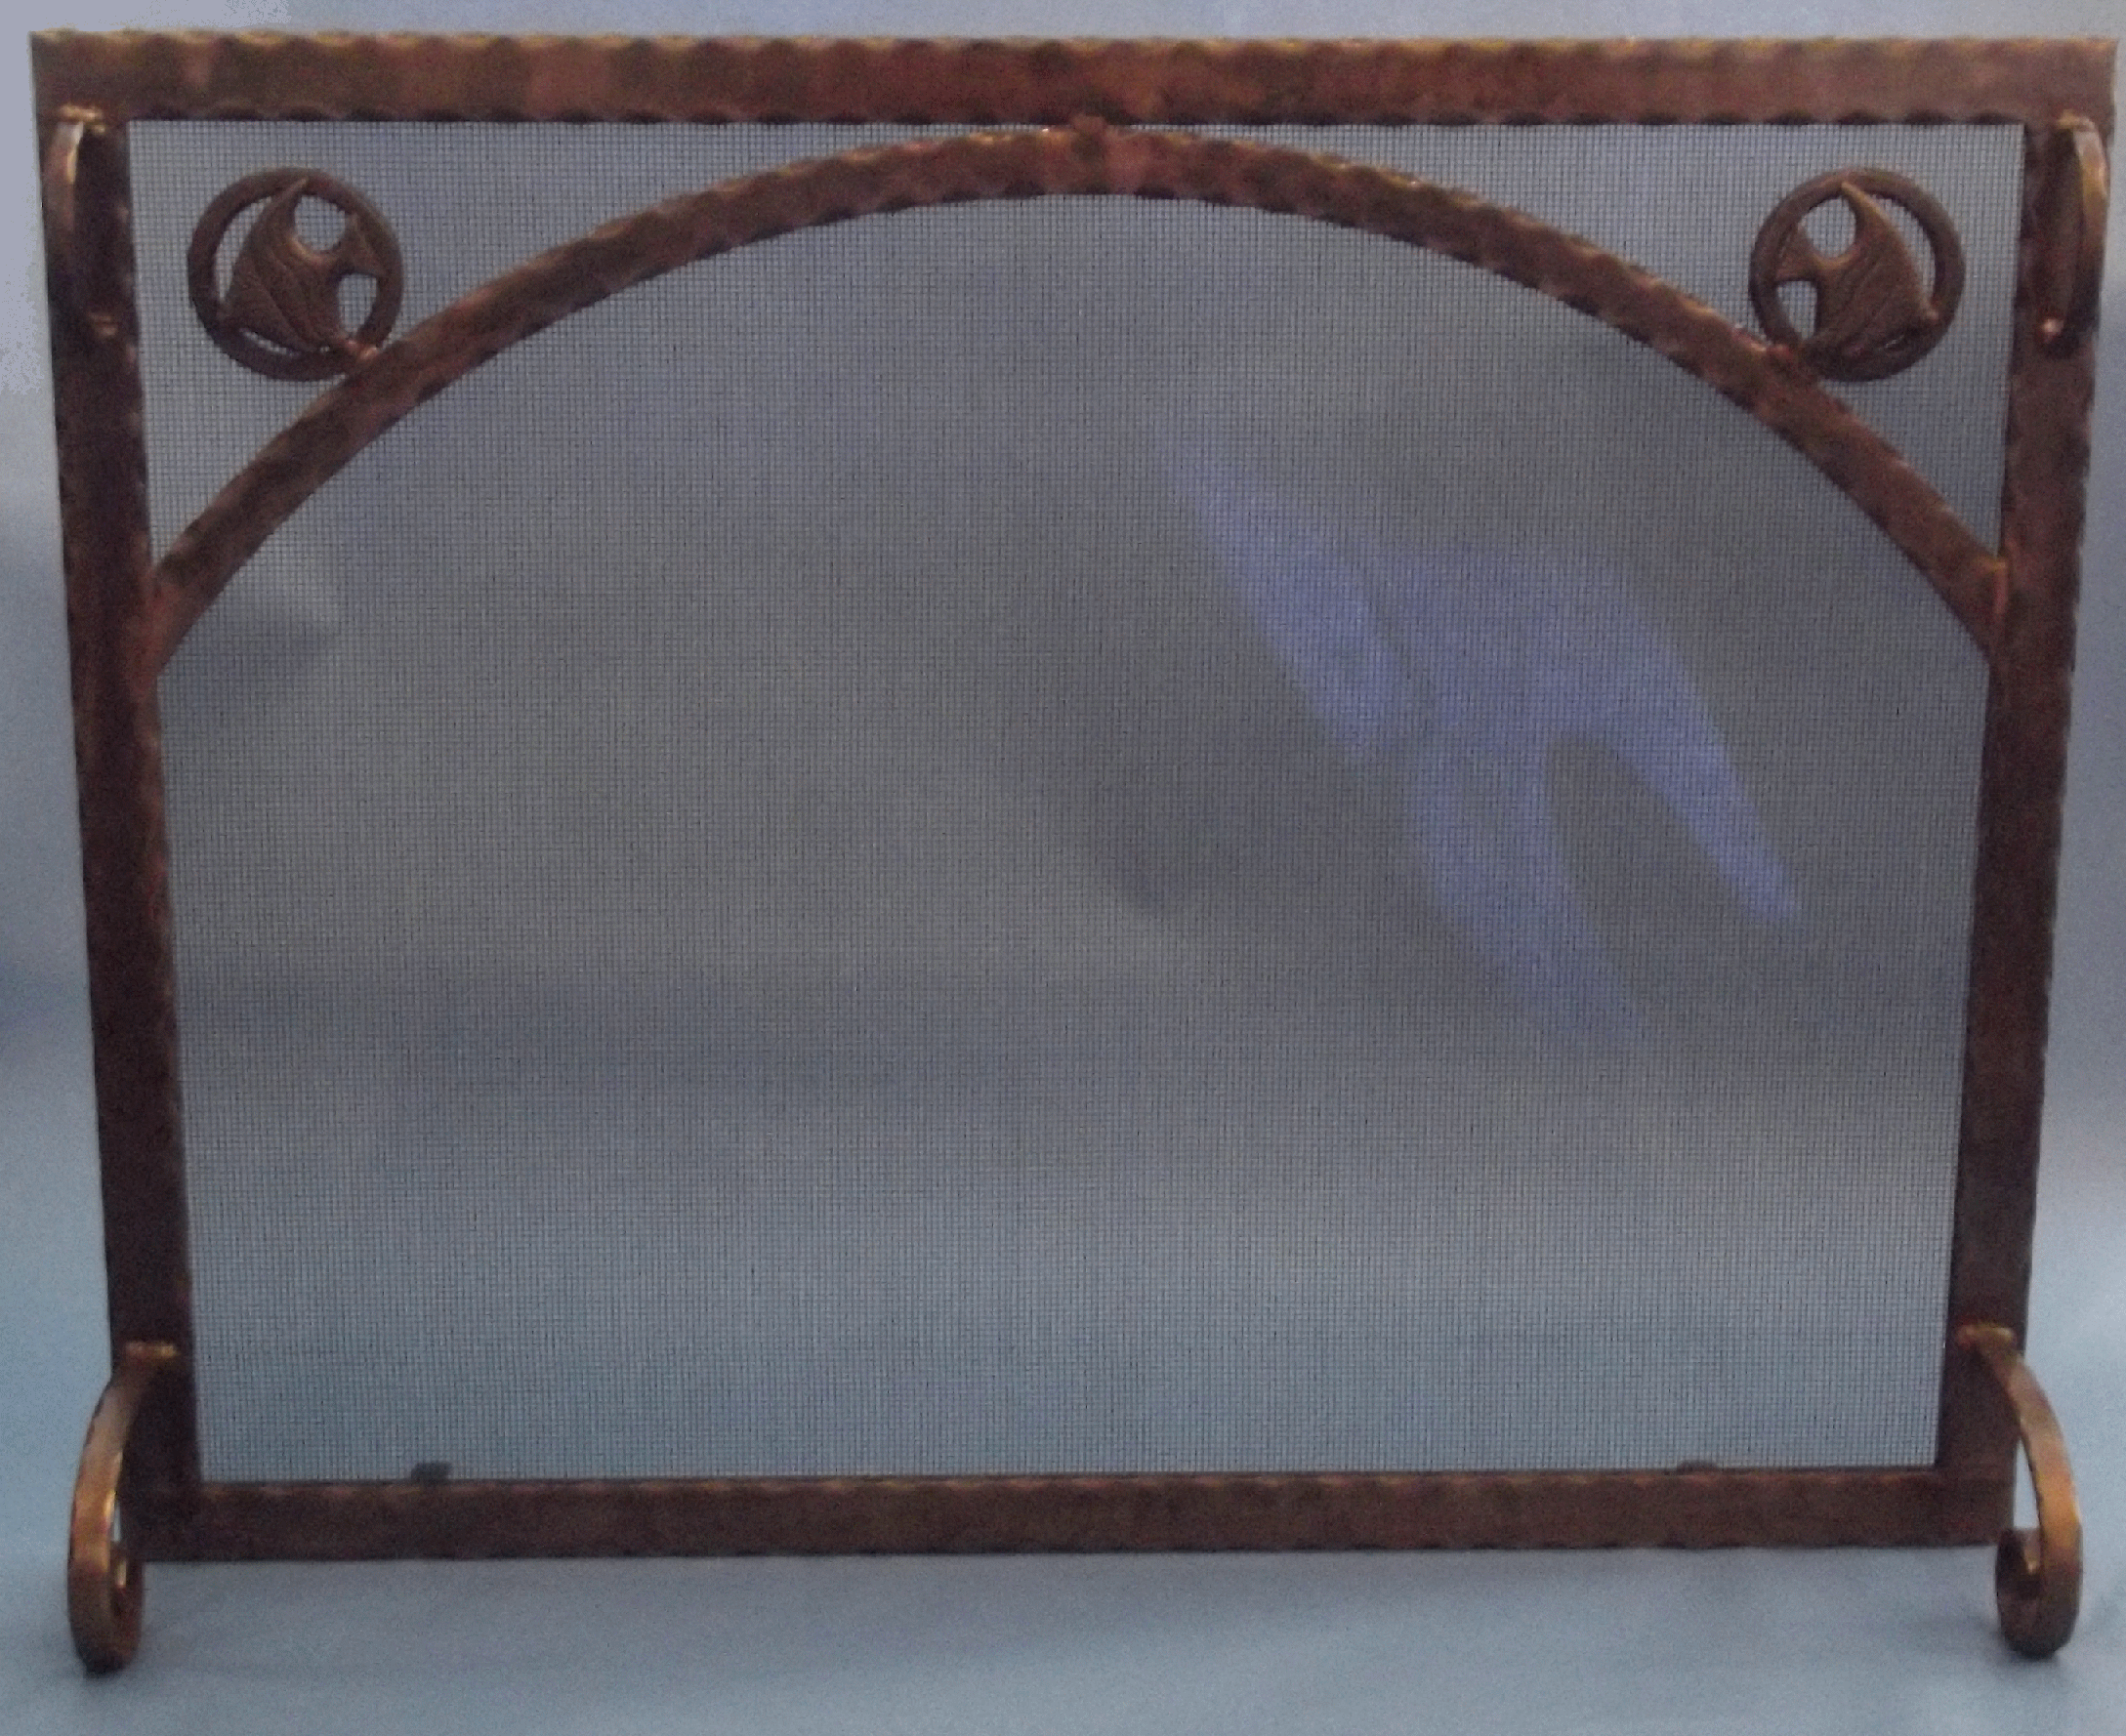 sa 107 flat panel fireplace screen hammered steel, second arch bar, angel fish apps inside hammered steel ring, standard handles and large scroll feet with all antique copper finish